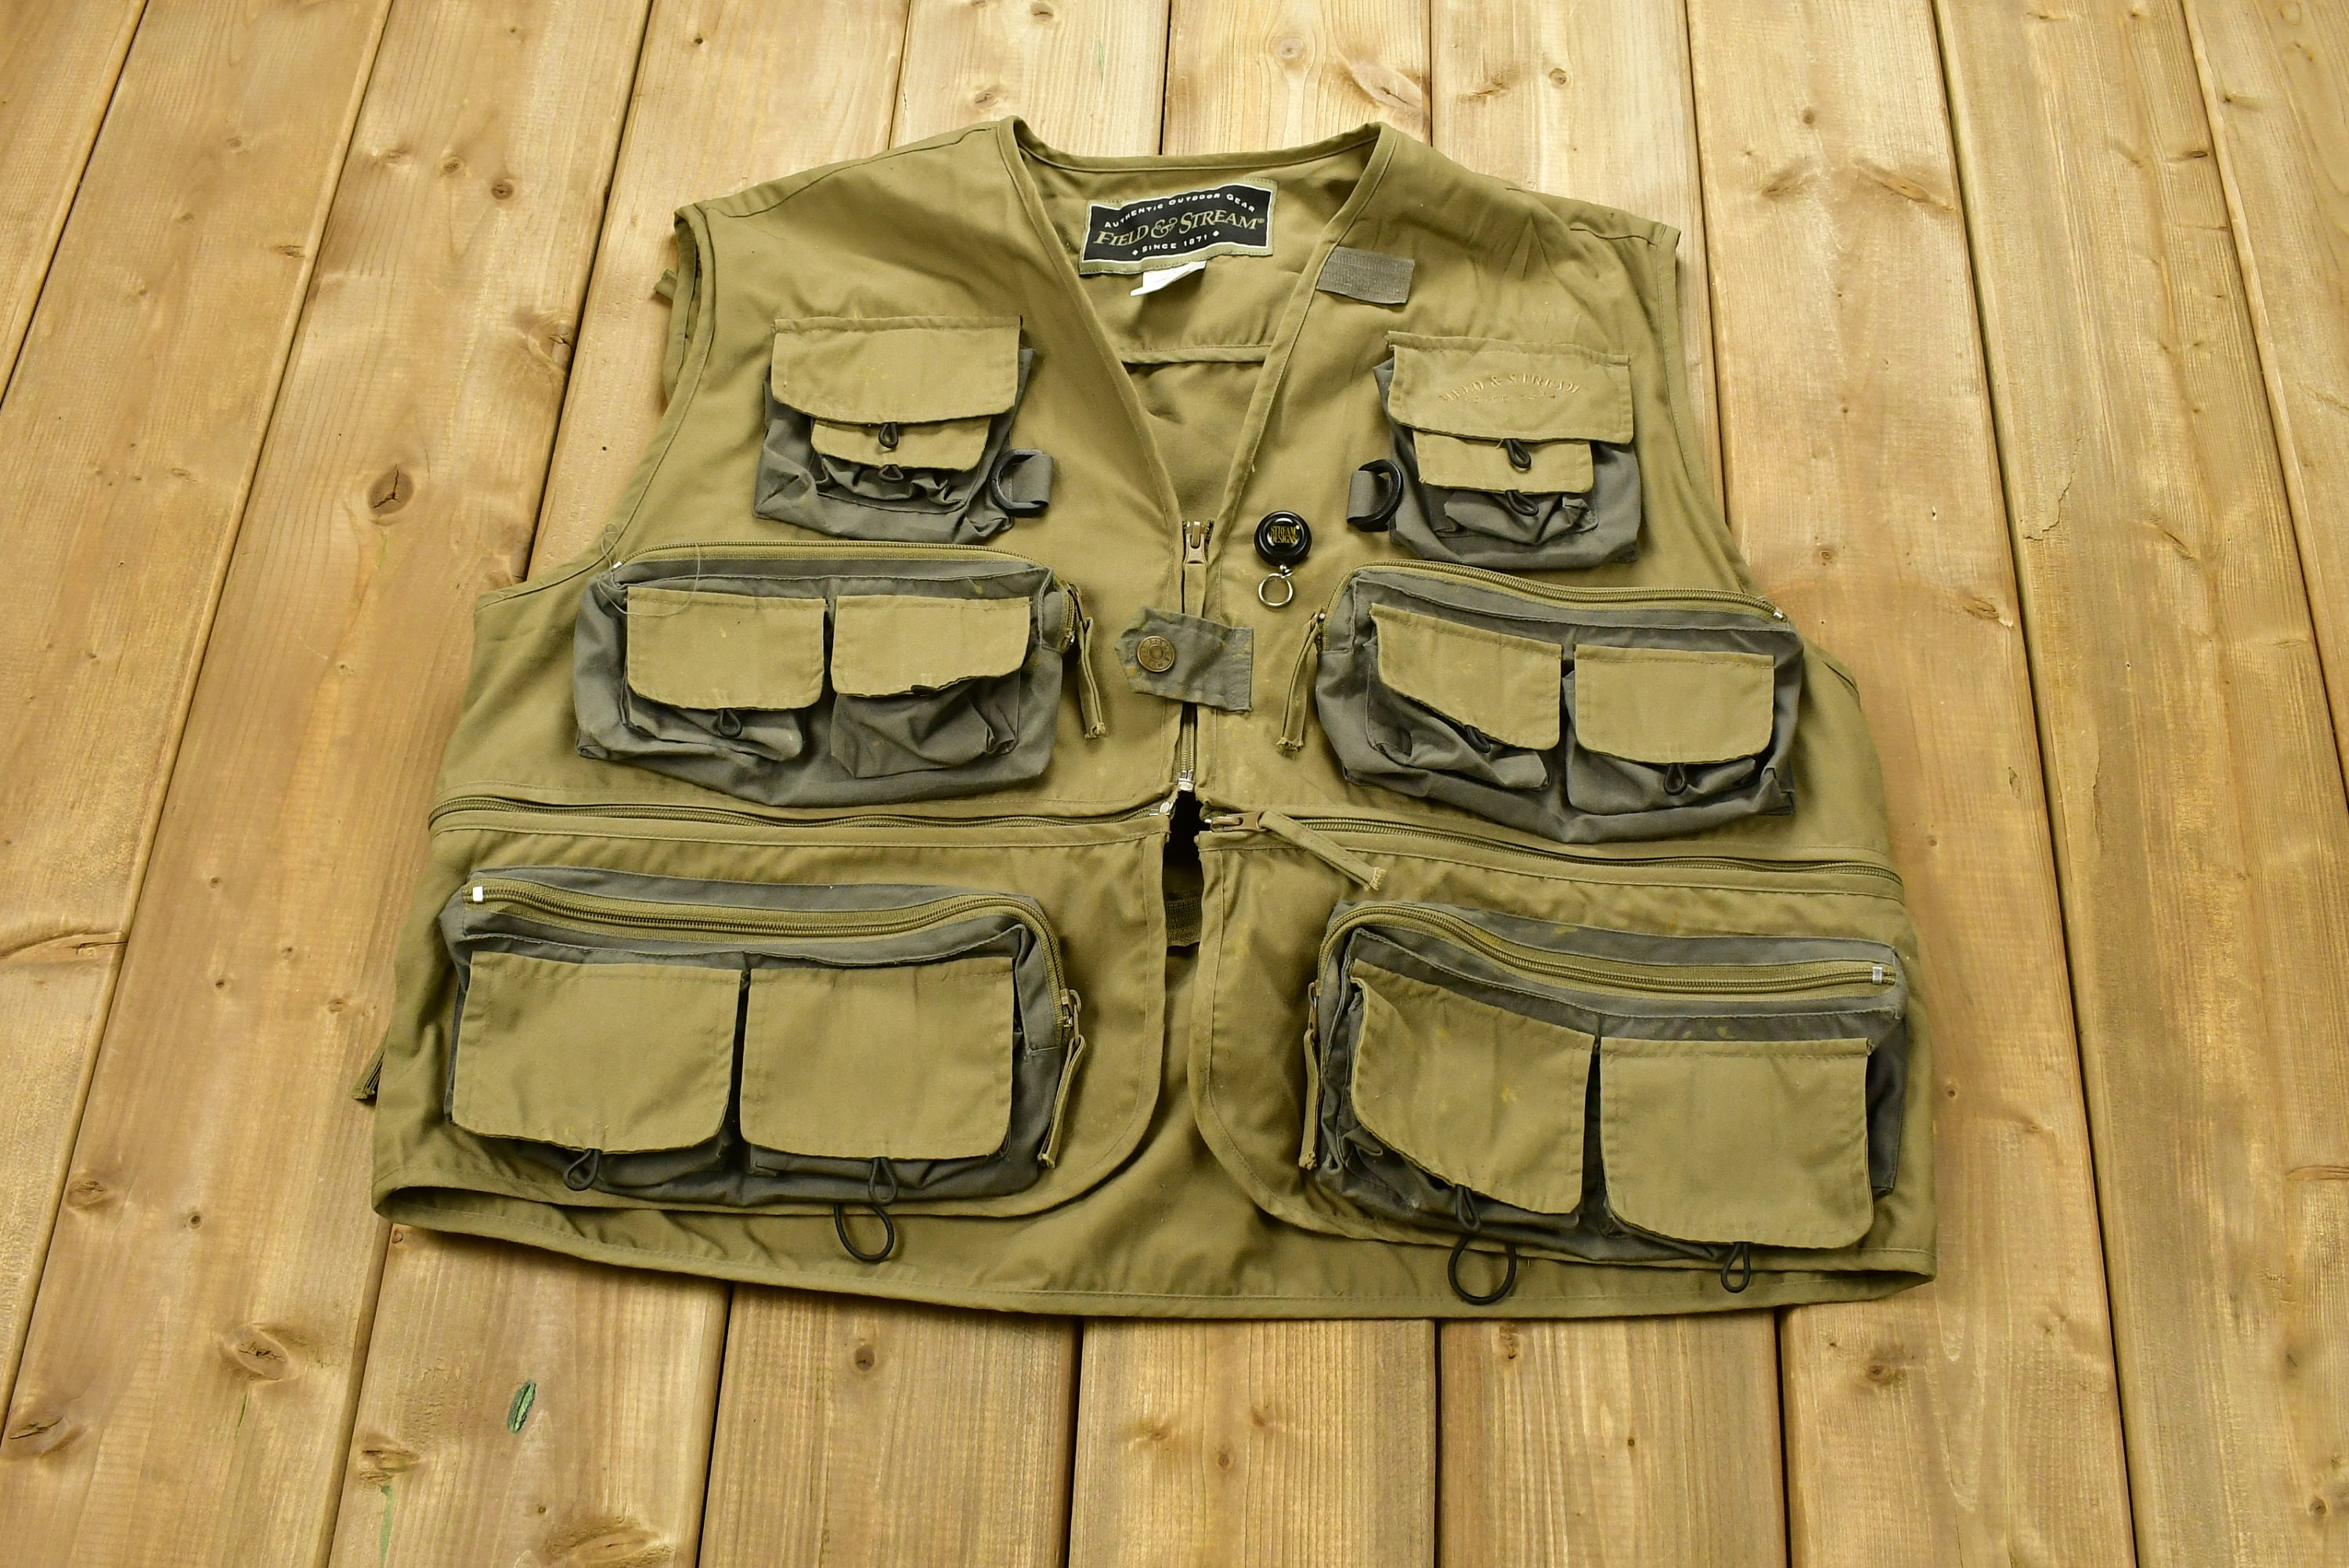 Buy Vintage 1990s Field & Stream Utility Tactical Fishing Vest / Authentic  Outdoor Gear / Streetwear / Hiking / Fishing Vest / Hunting Vest Online in  India 